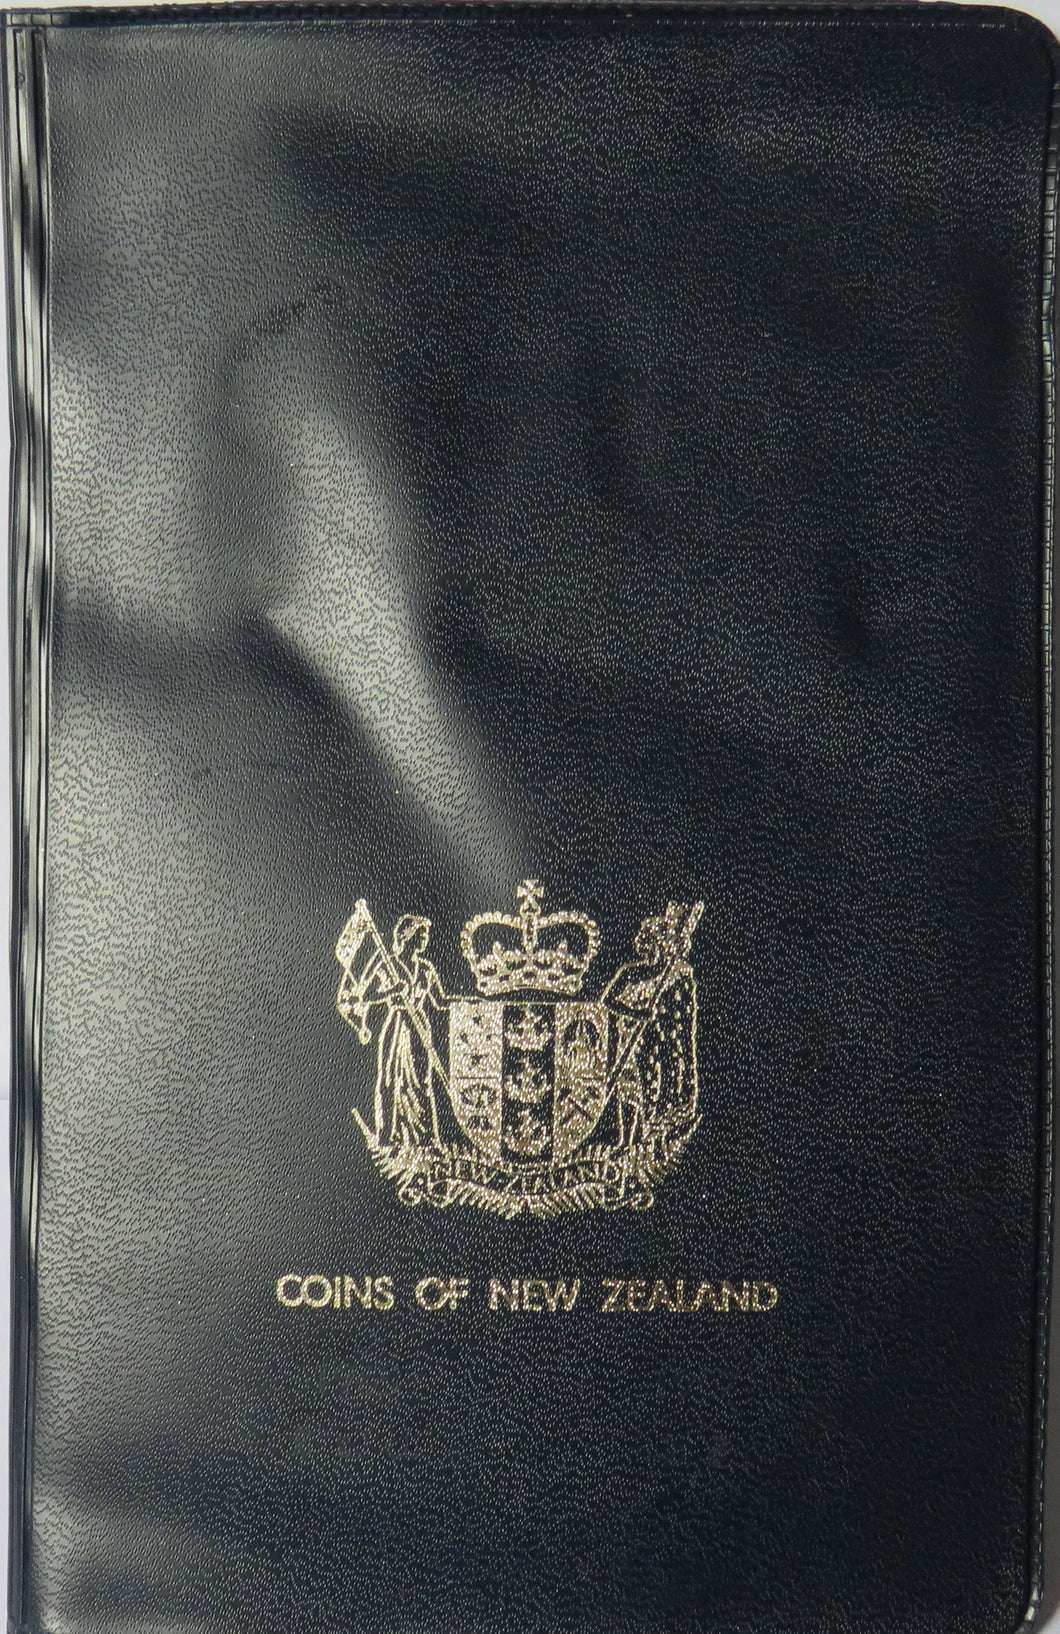 1968 Coins Of New Zealand - Coin Set